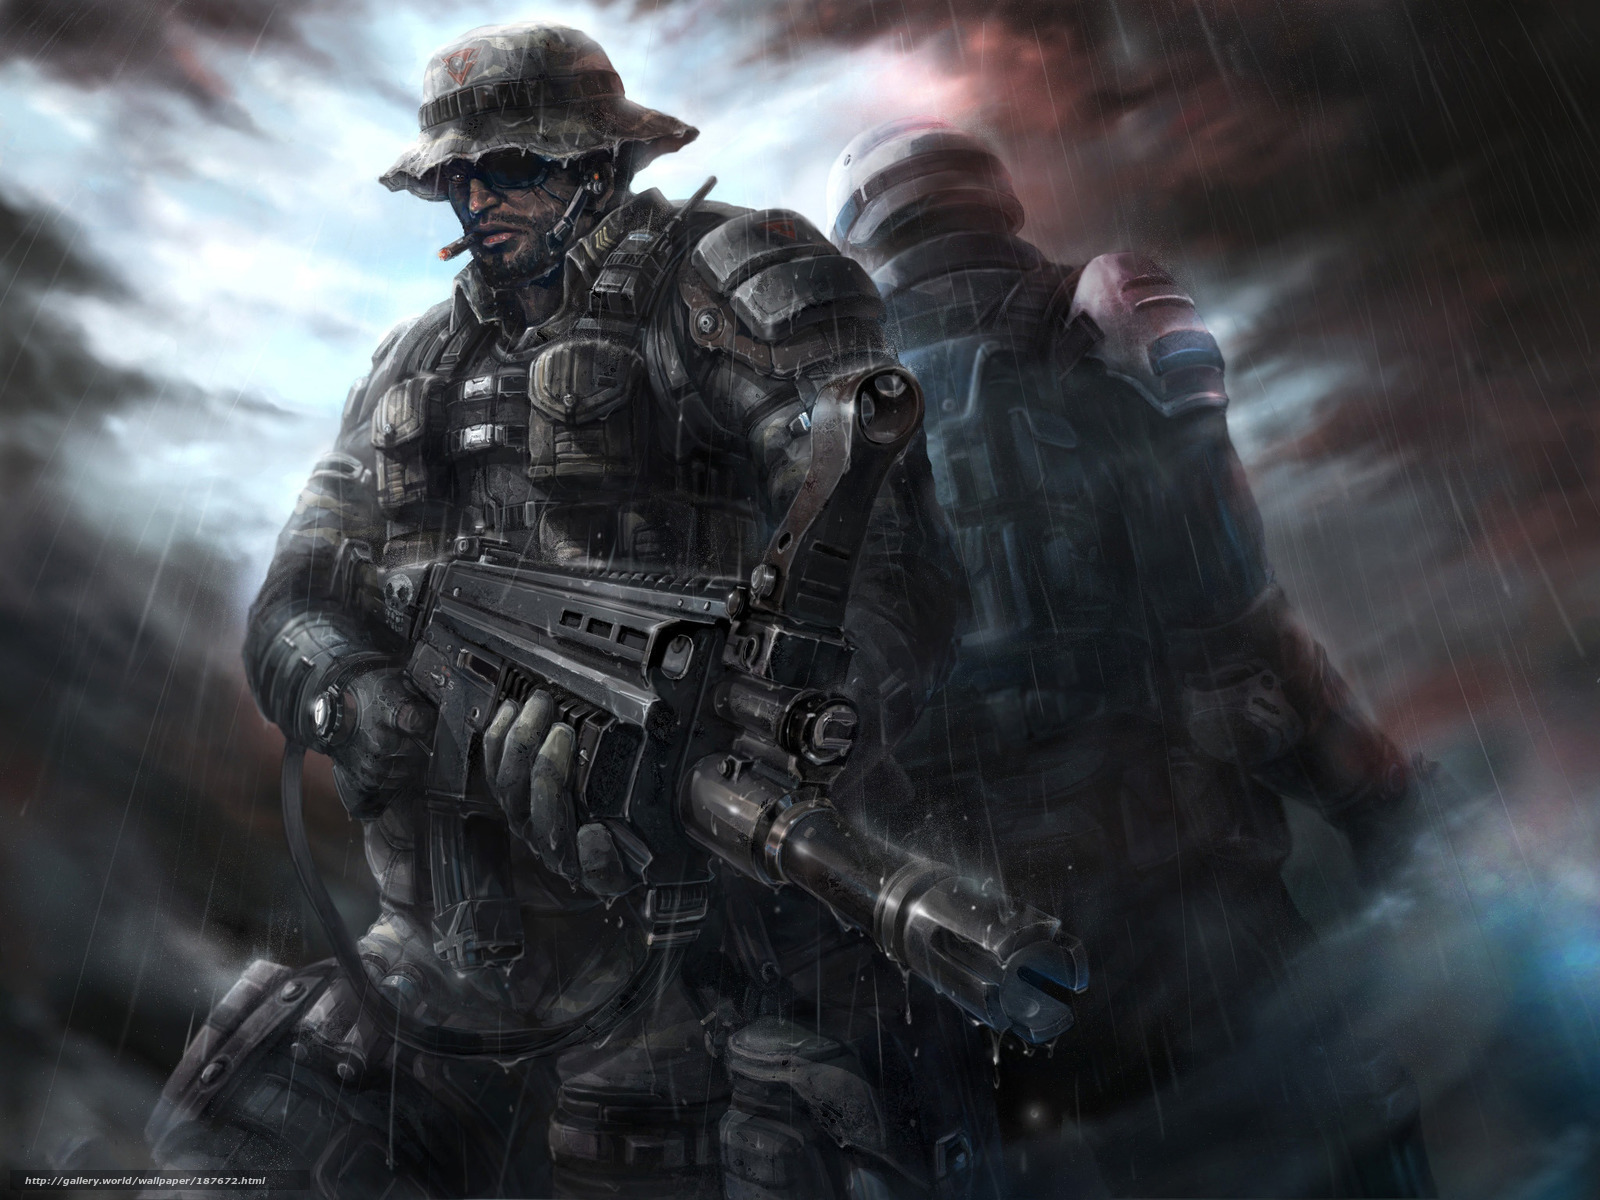 delta ops army special forces free download game